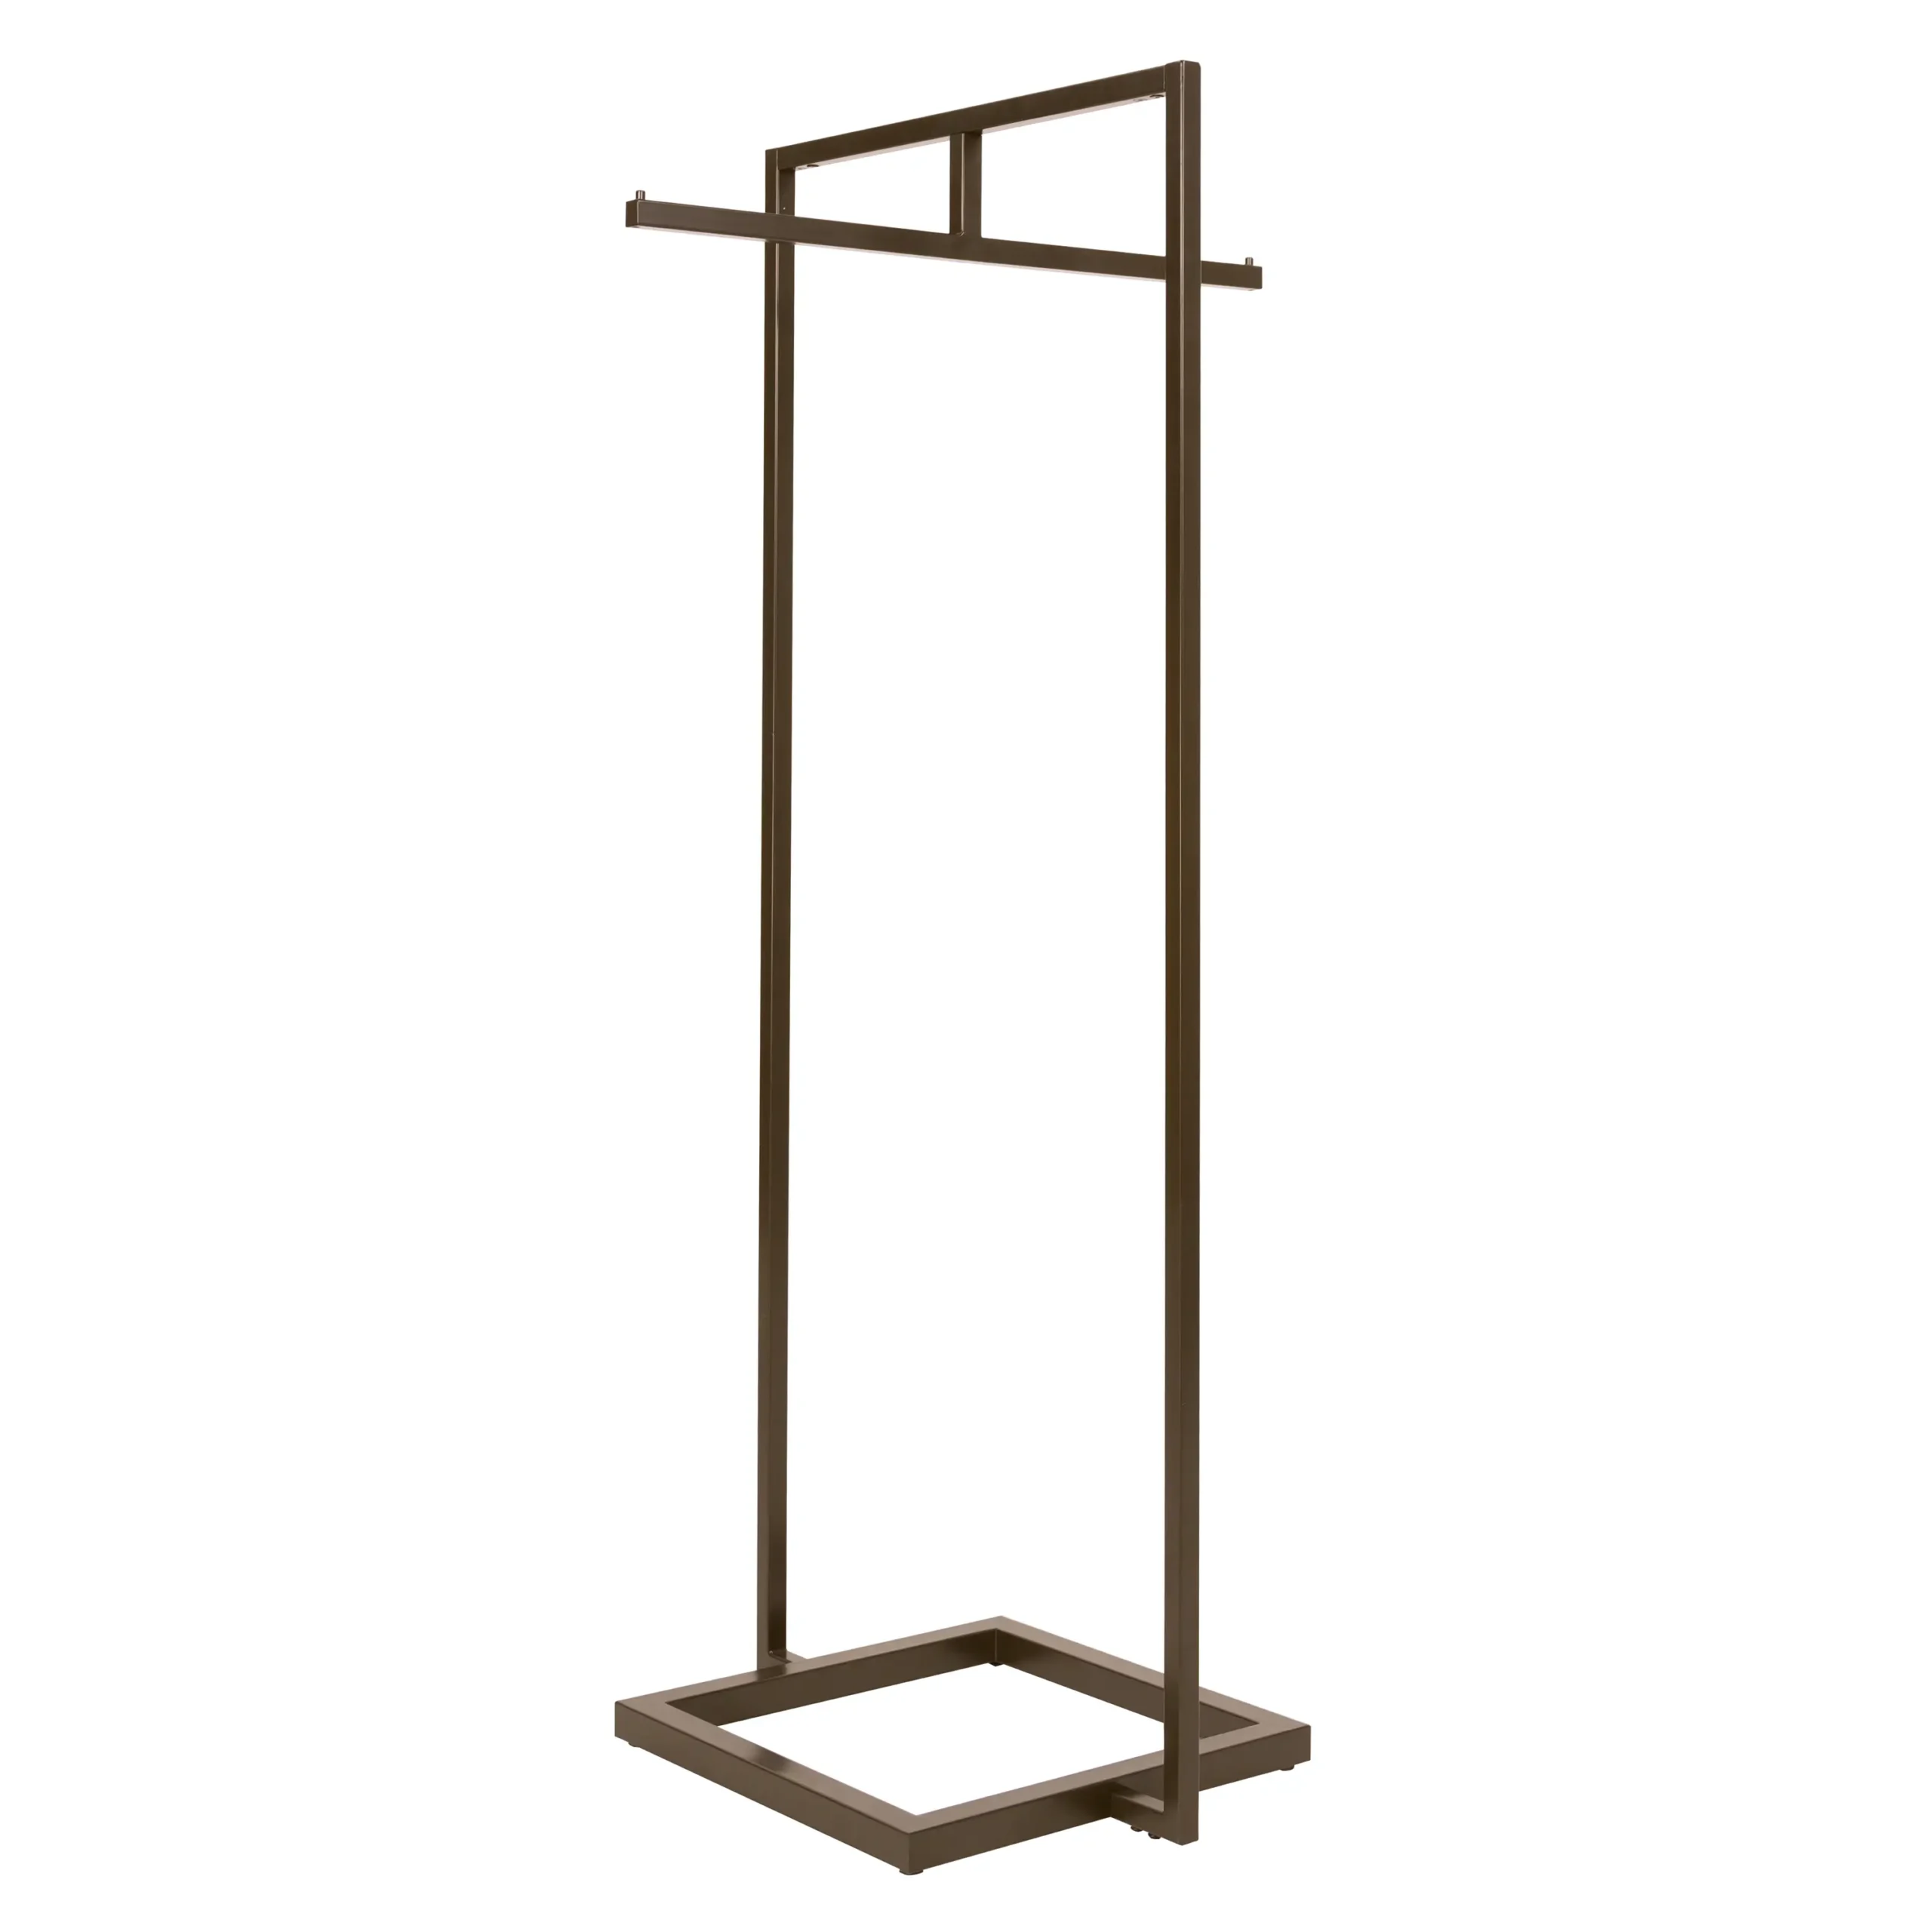 Sofia Extended 2-Way Rack with Straight Bar